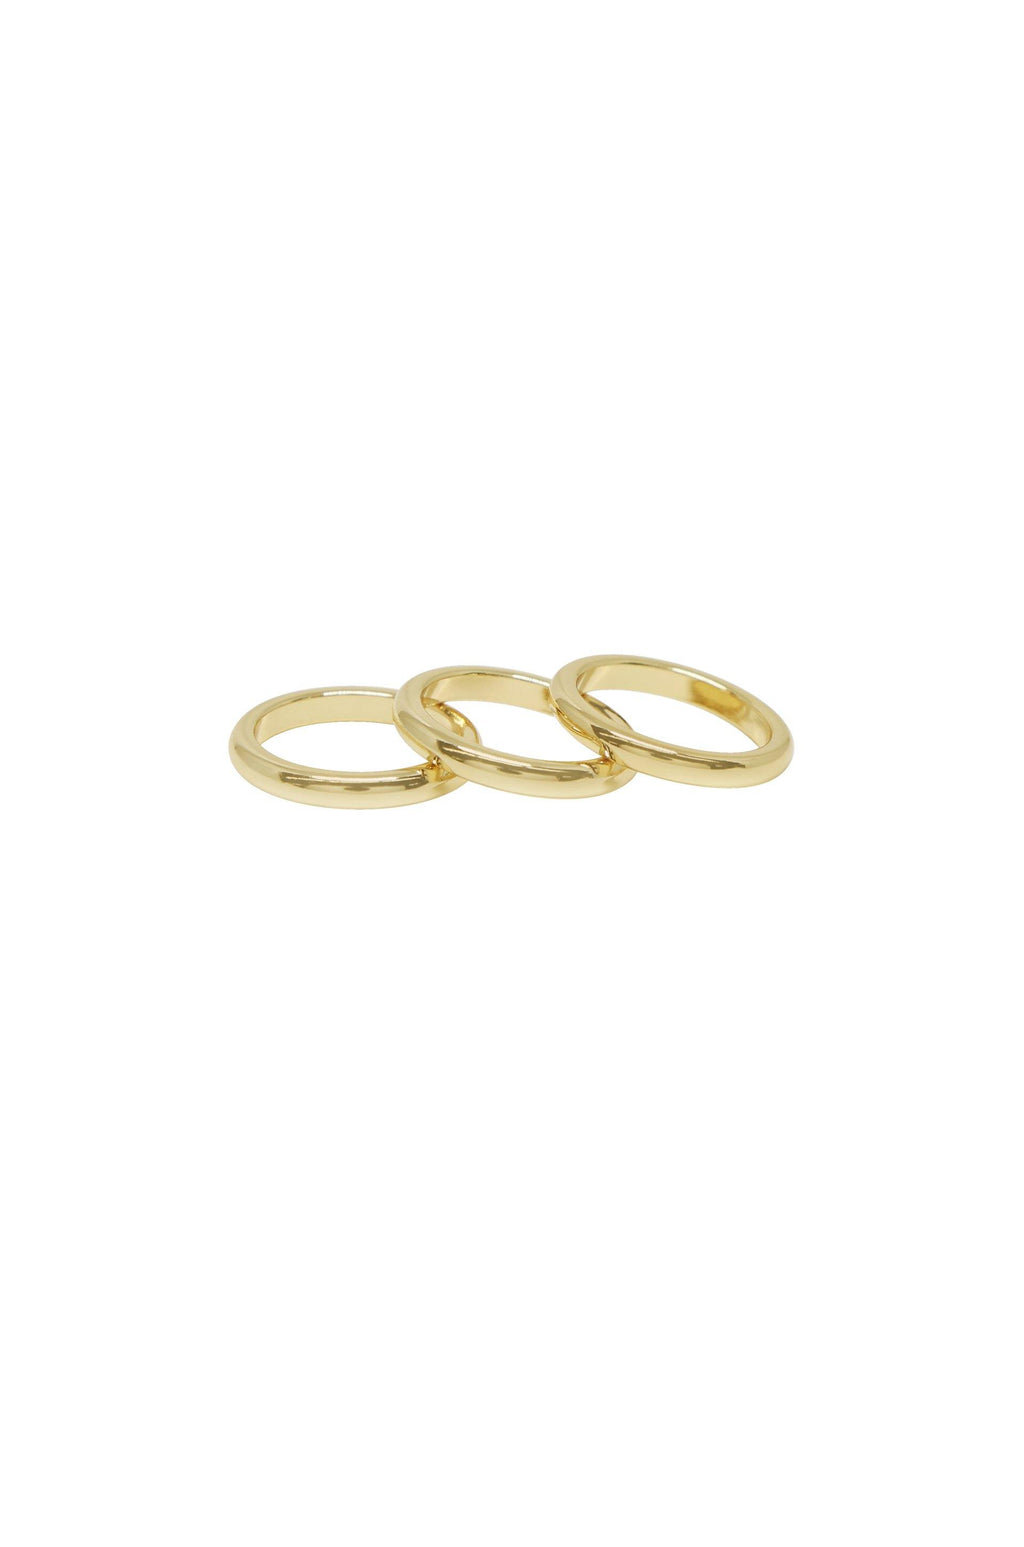 Back to Basics 18k Gold Plated Ring Set of 3 - The Gallant Way